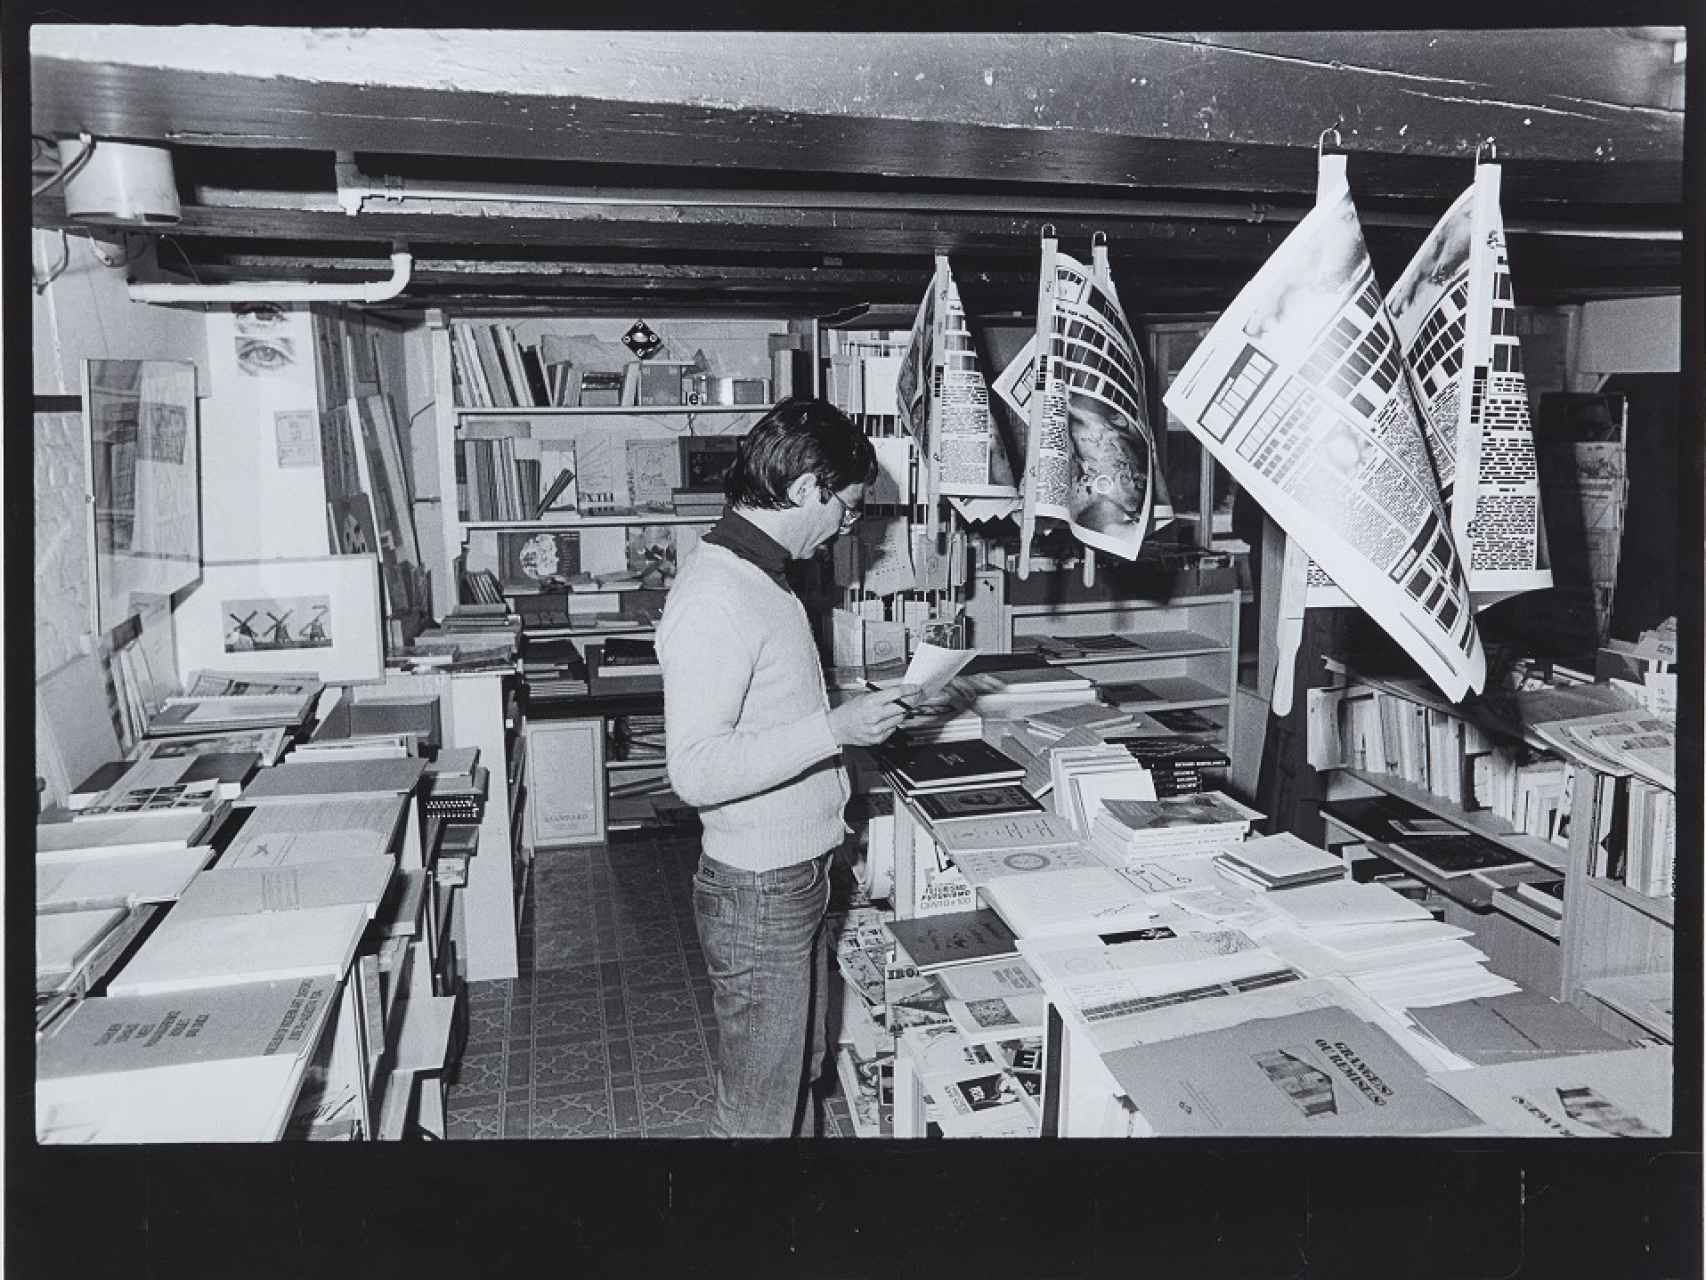 Ulises Carrión en Other Books and So, Amsterdam, 1975